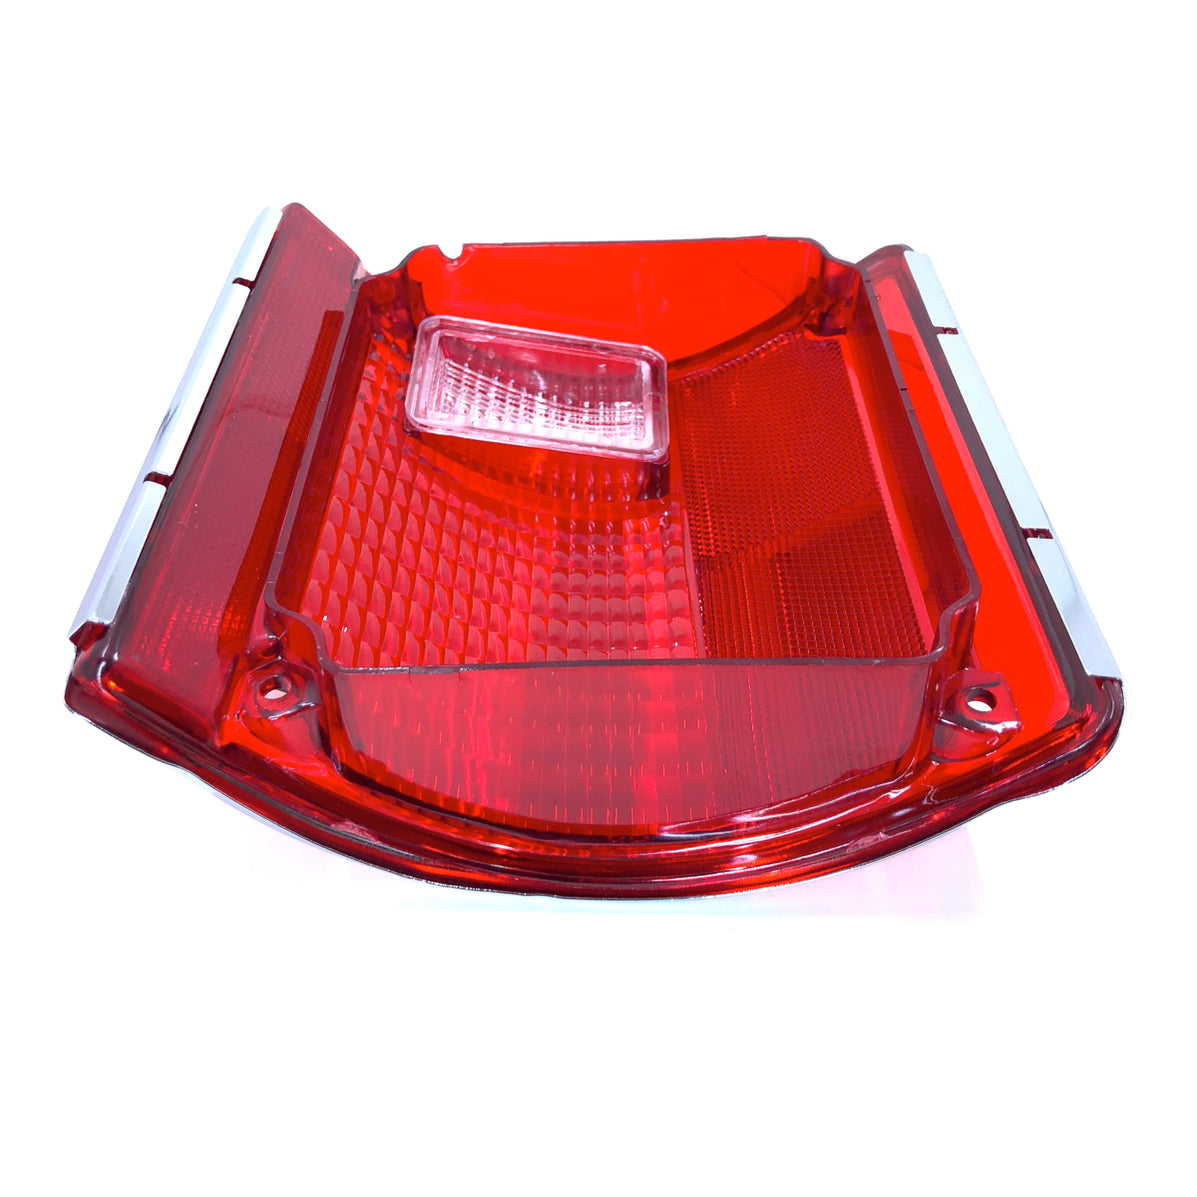 Right Hand Tail Light Lens for 1973-91 Chevy C10 Pickup Truck with Chr ...